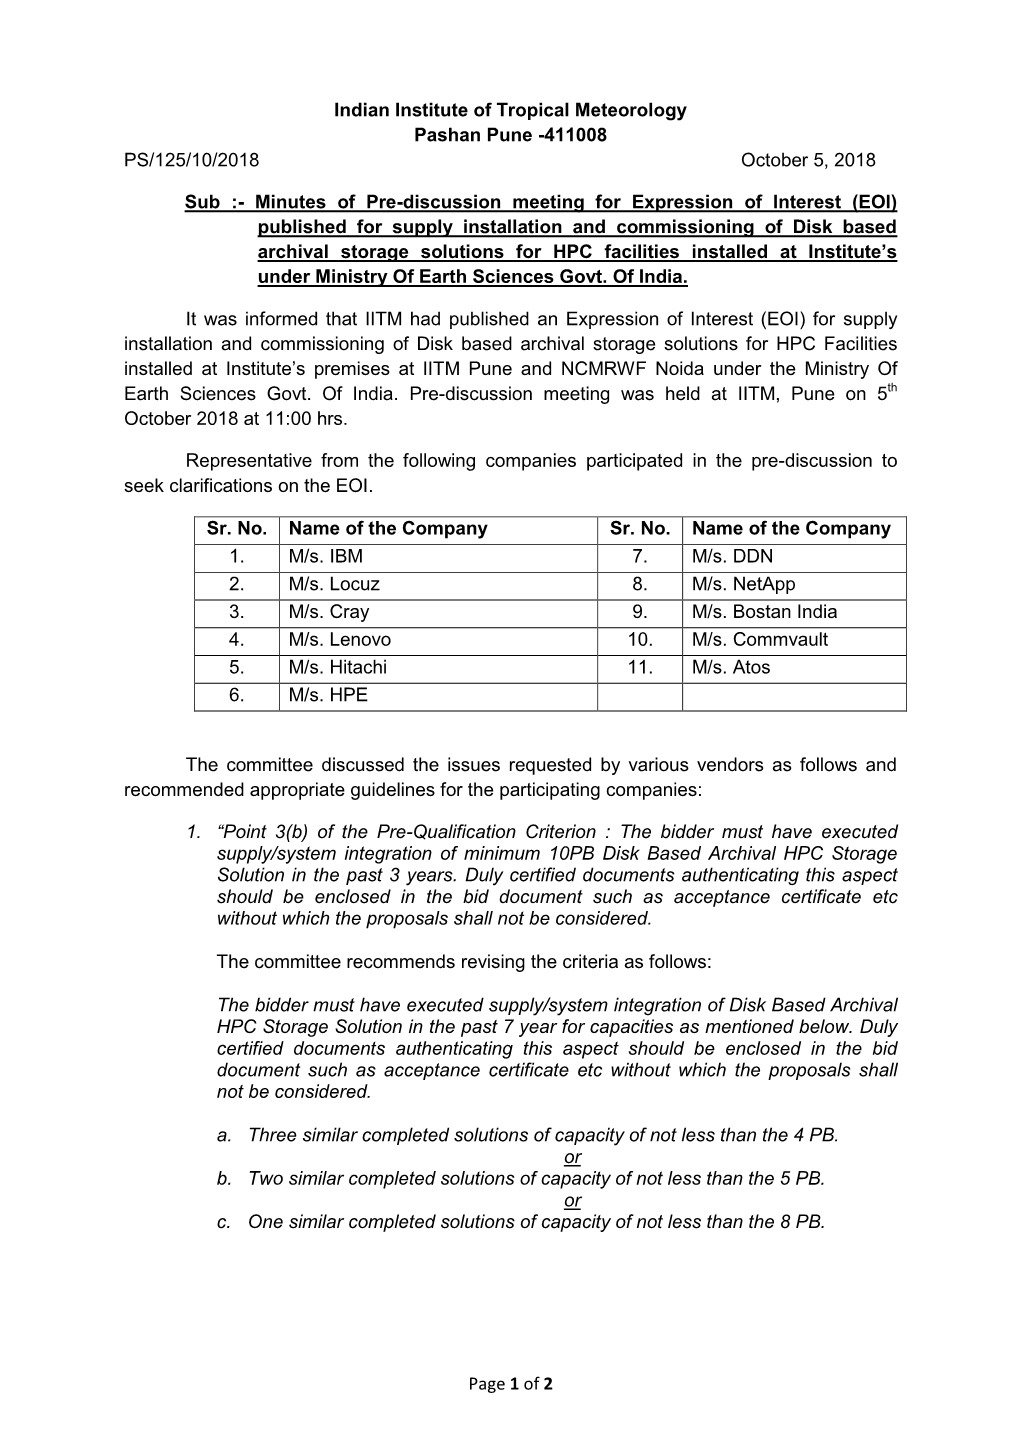 Page 1 of 2 Indian Institute of Tropical Meteorology Pashan Pune -411008